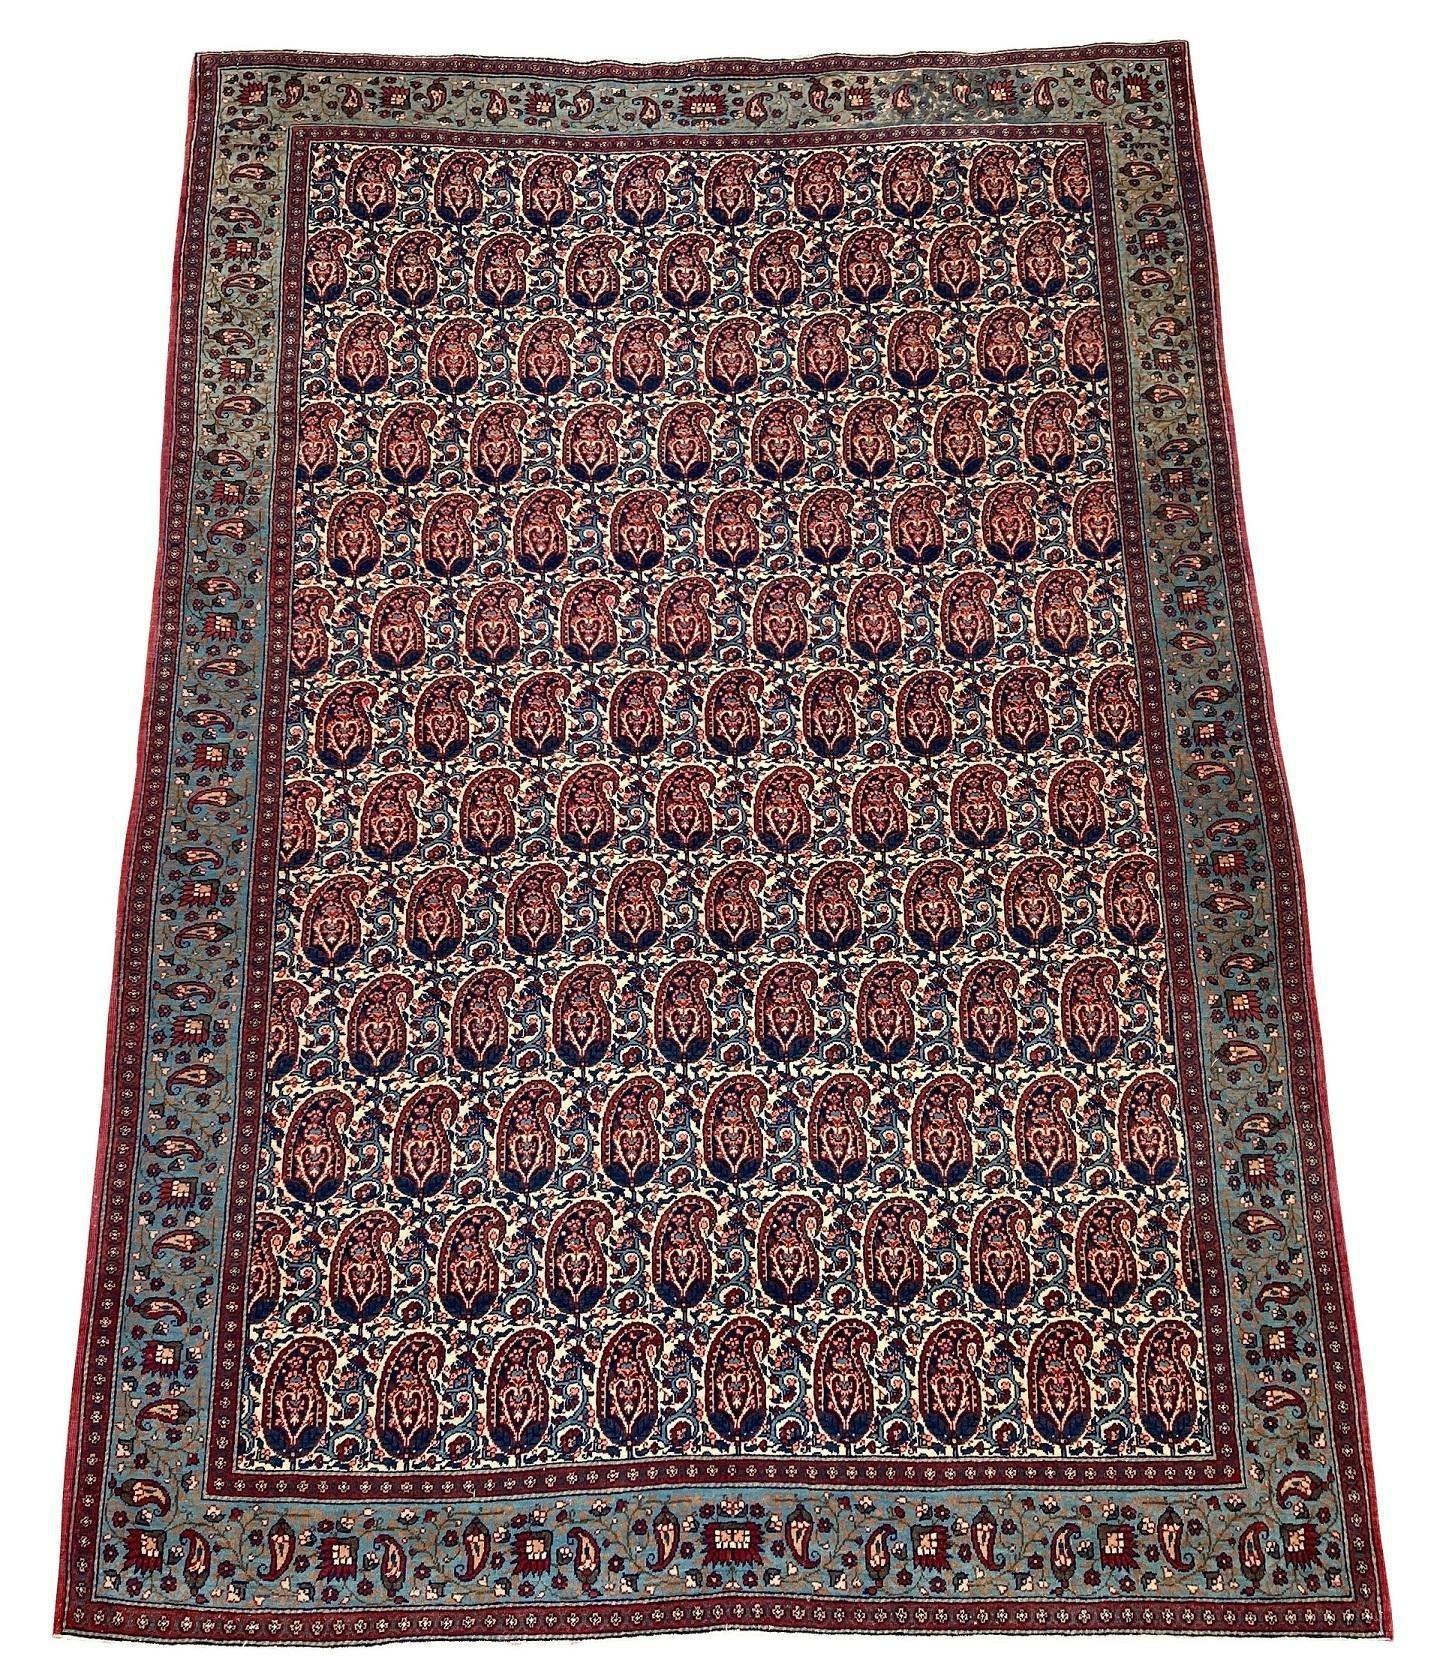 A fabulous antique Qum rug, handwoven circa 1910 with an all-over boteh design on an ivory field and pale indigo border. Finely woven with lovely wool quality and stunning colours make this a very decorative antique rug.
Size: 2.00m x 1.36m (6ft 7in